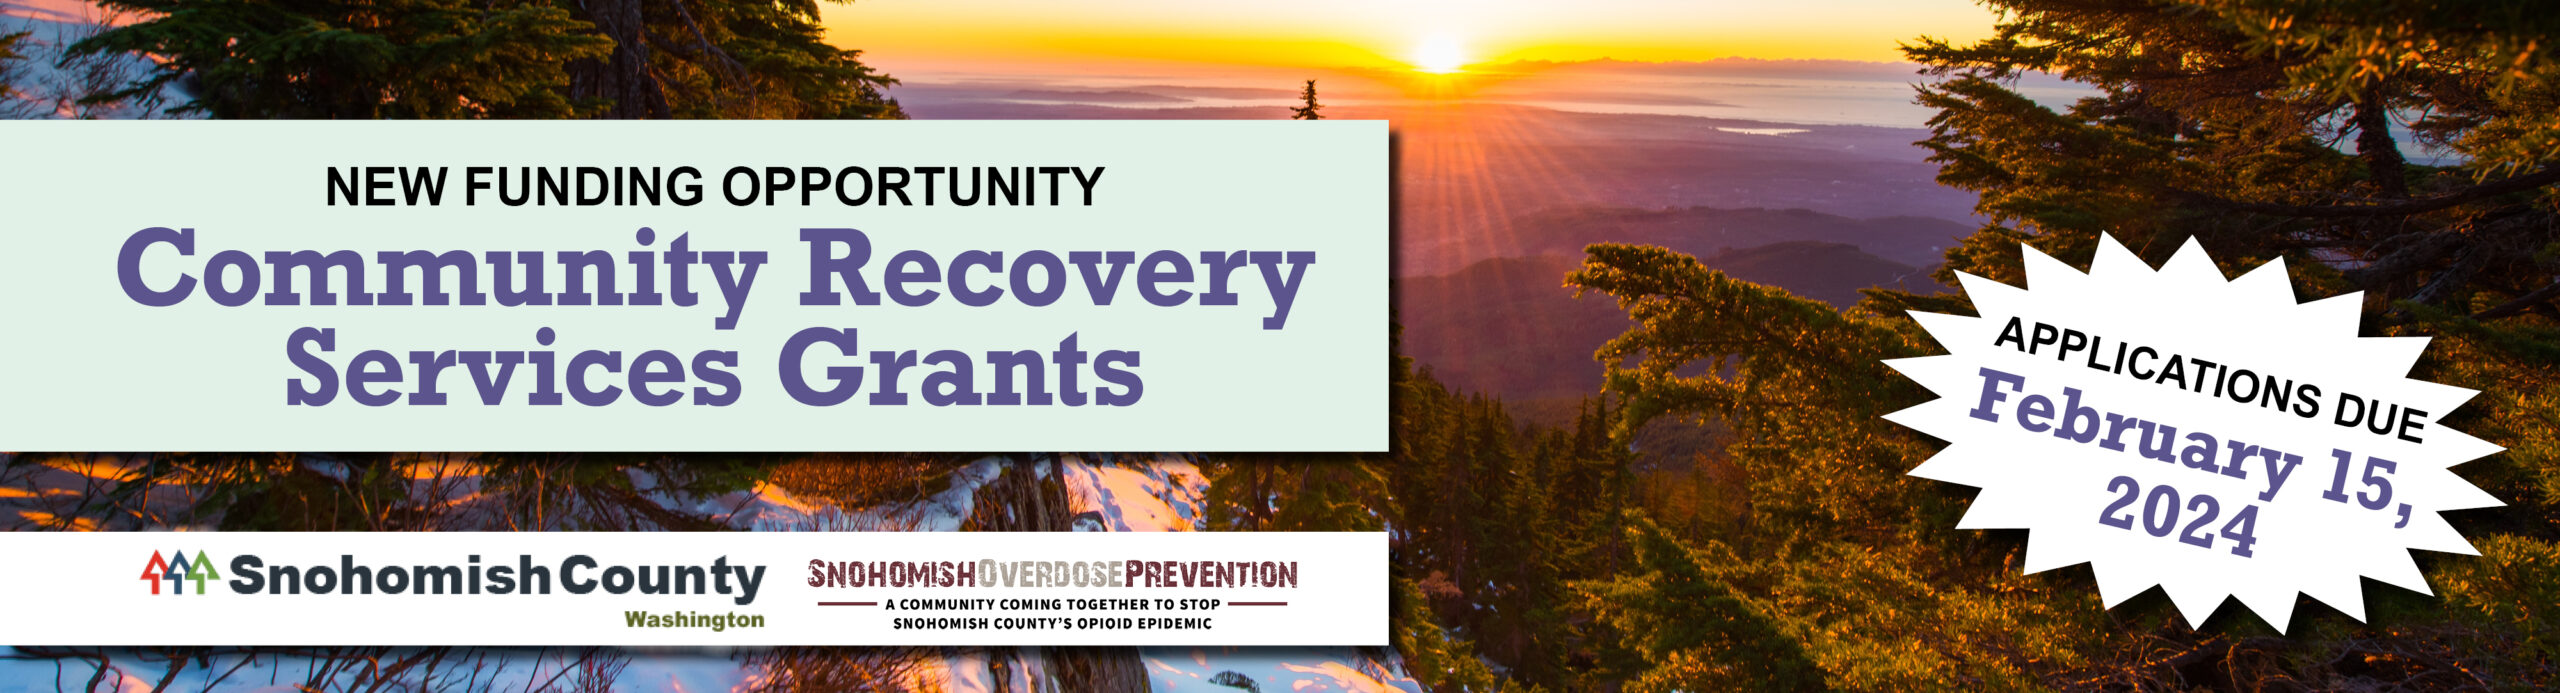 Community Recovery Services Grants